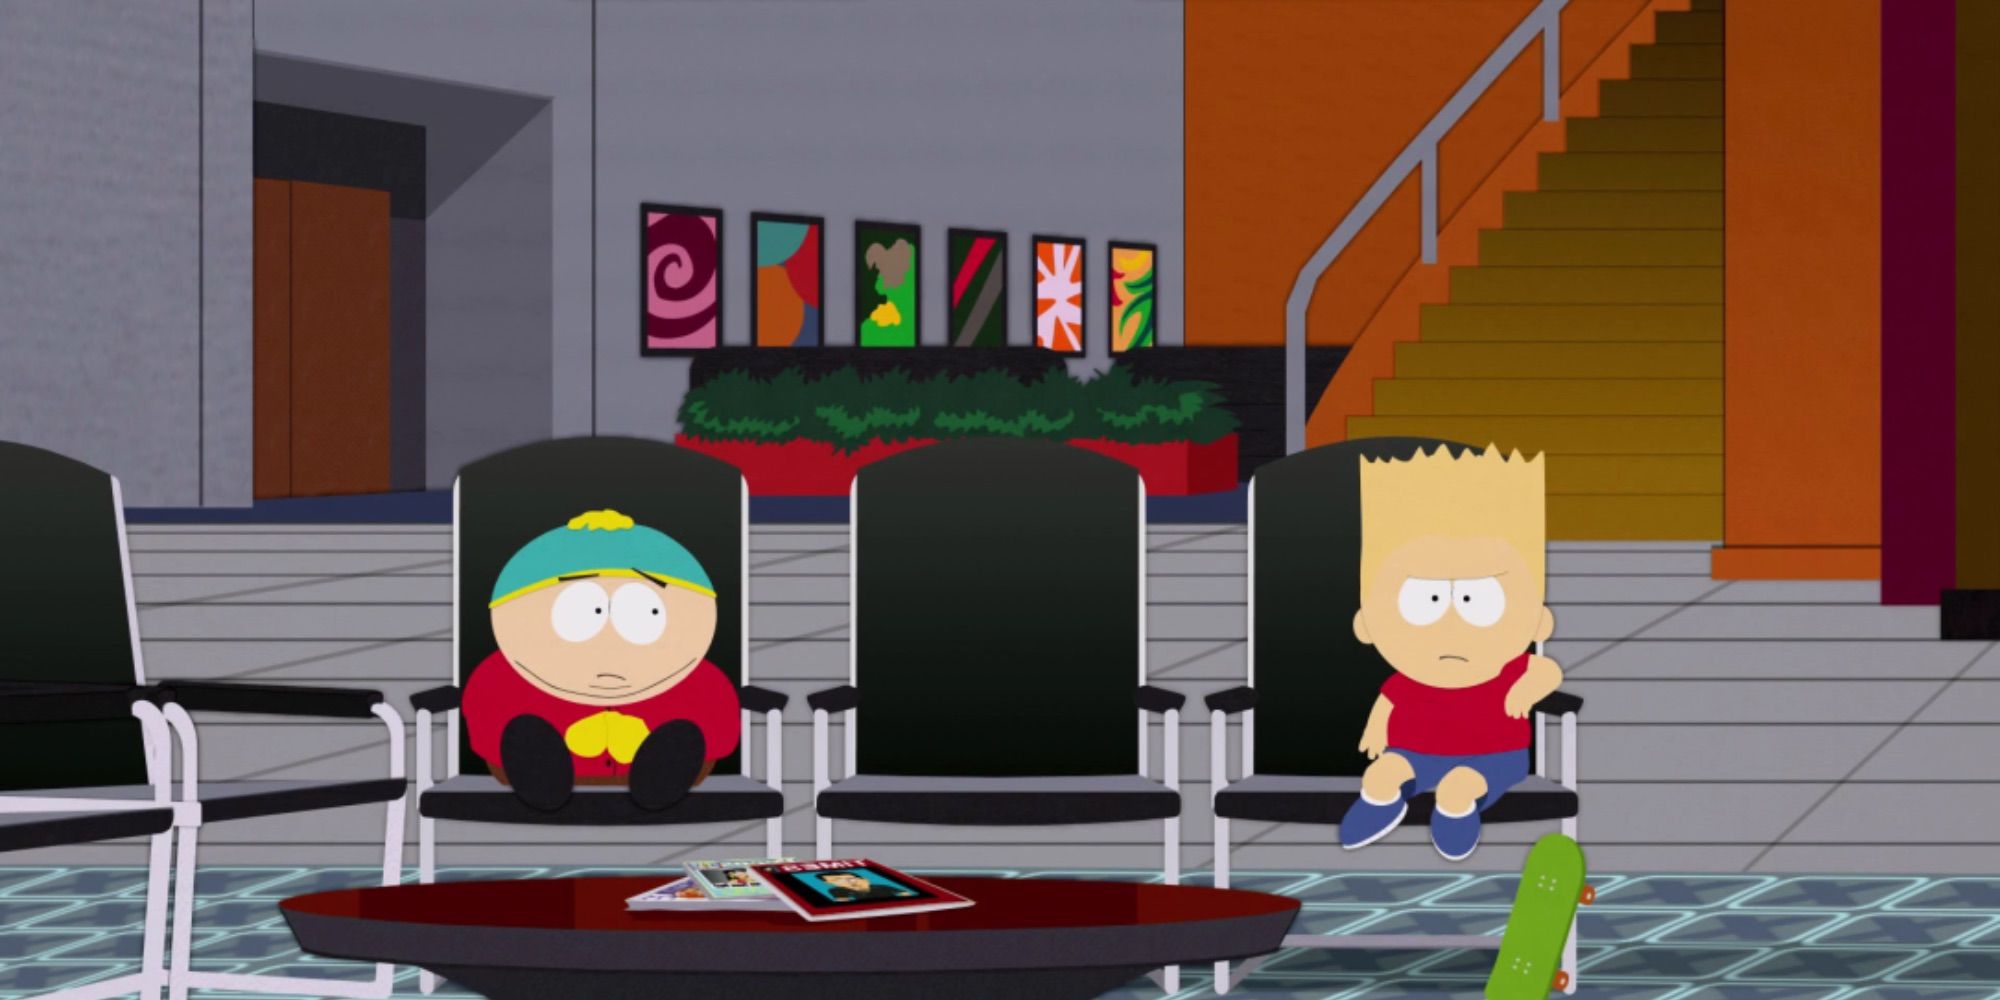 A nervous Cartman sits in a lobby alongside an angered Bart Simpson.